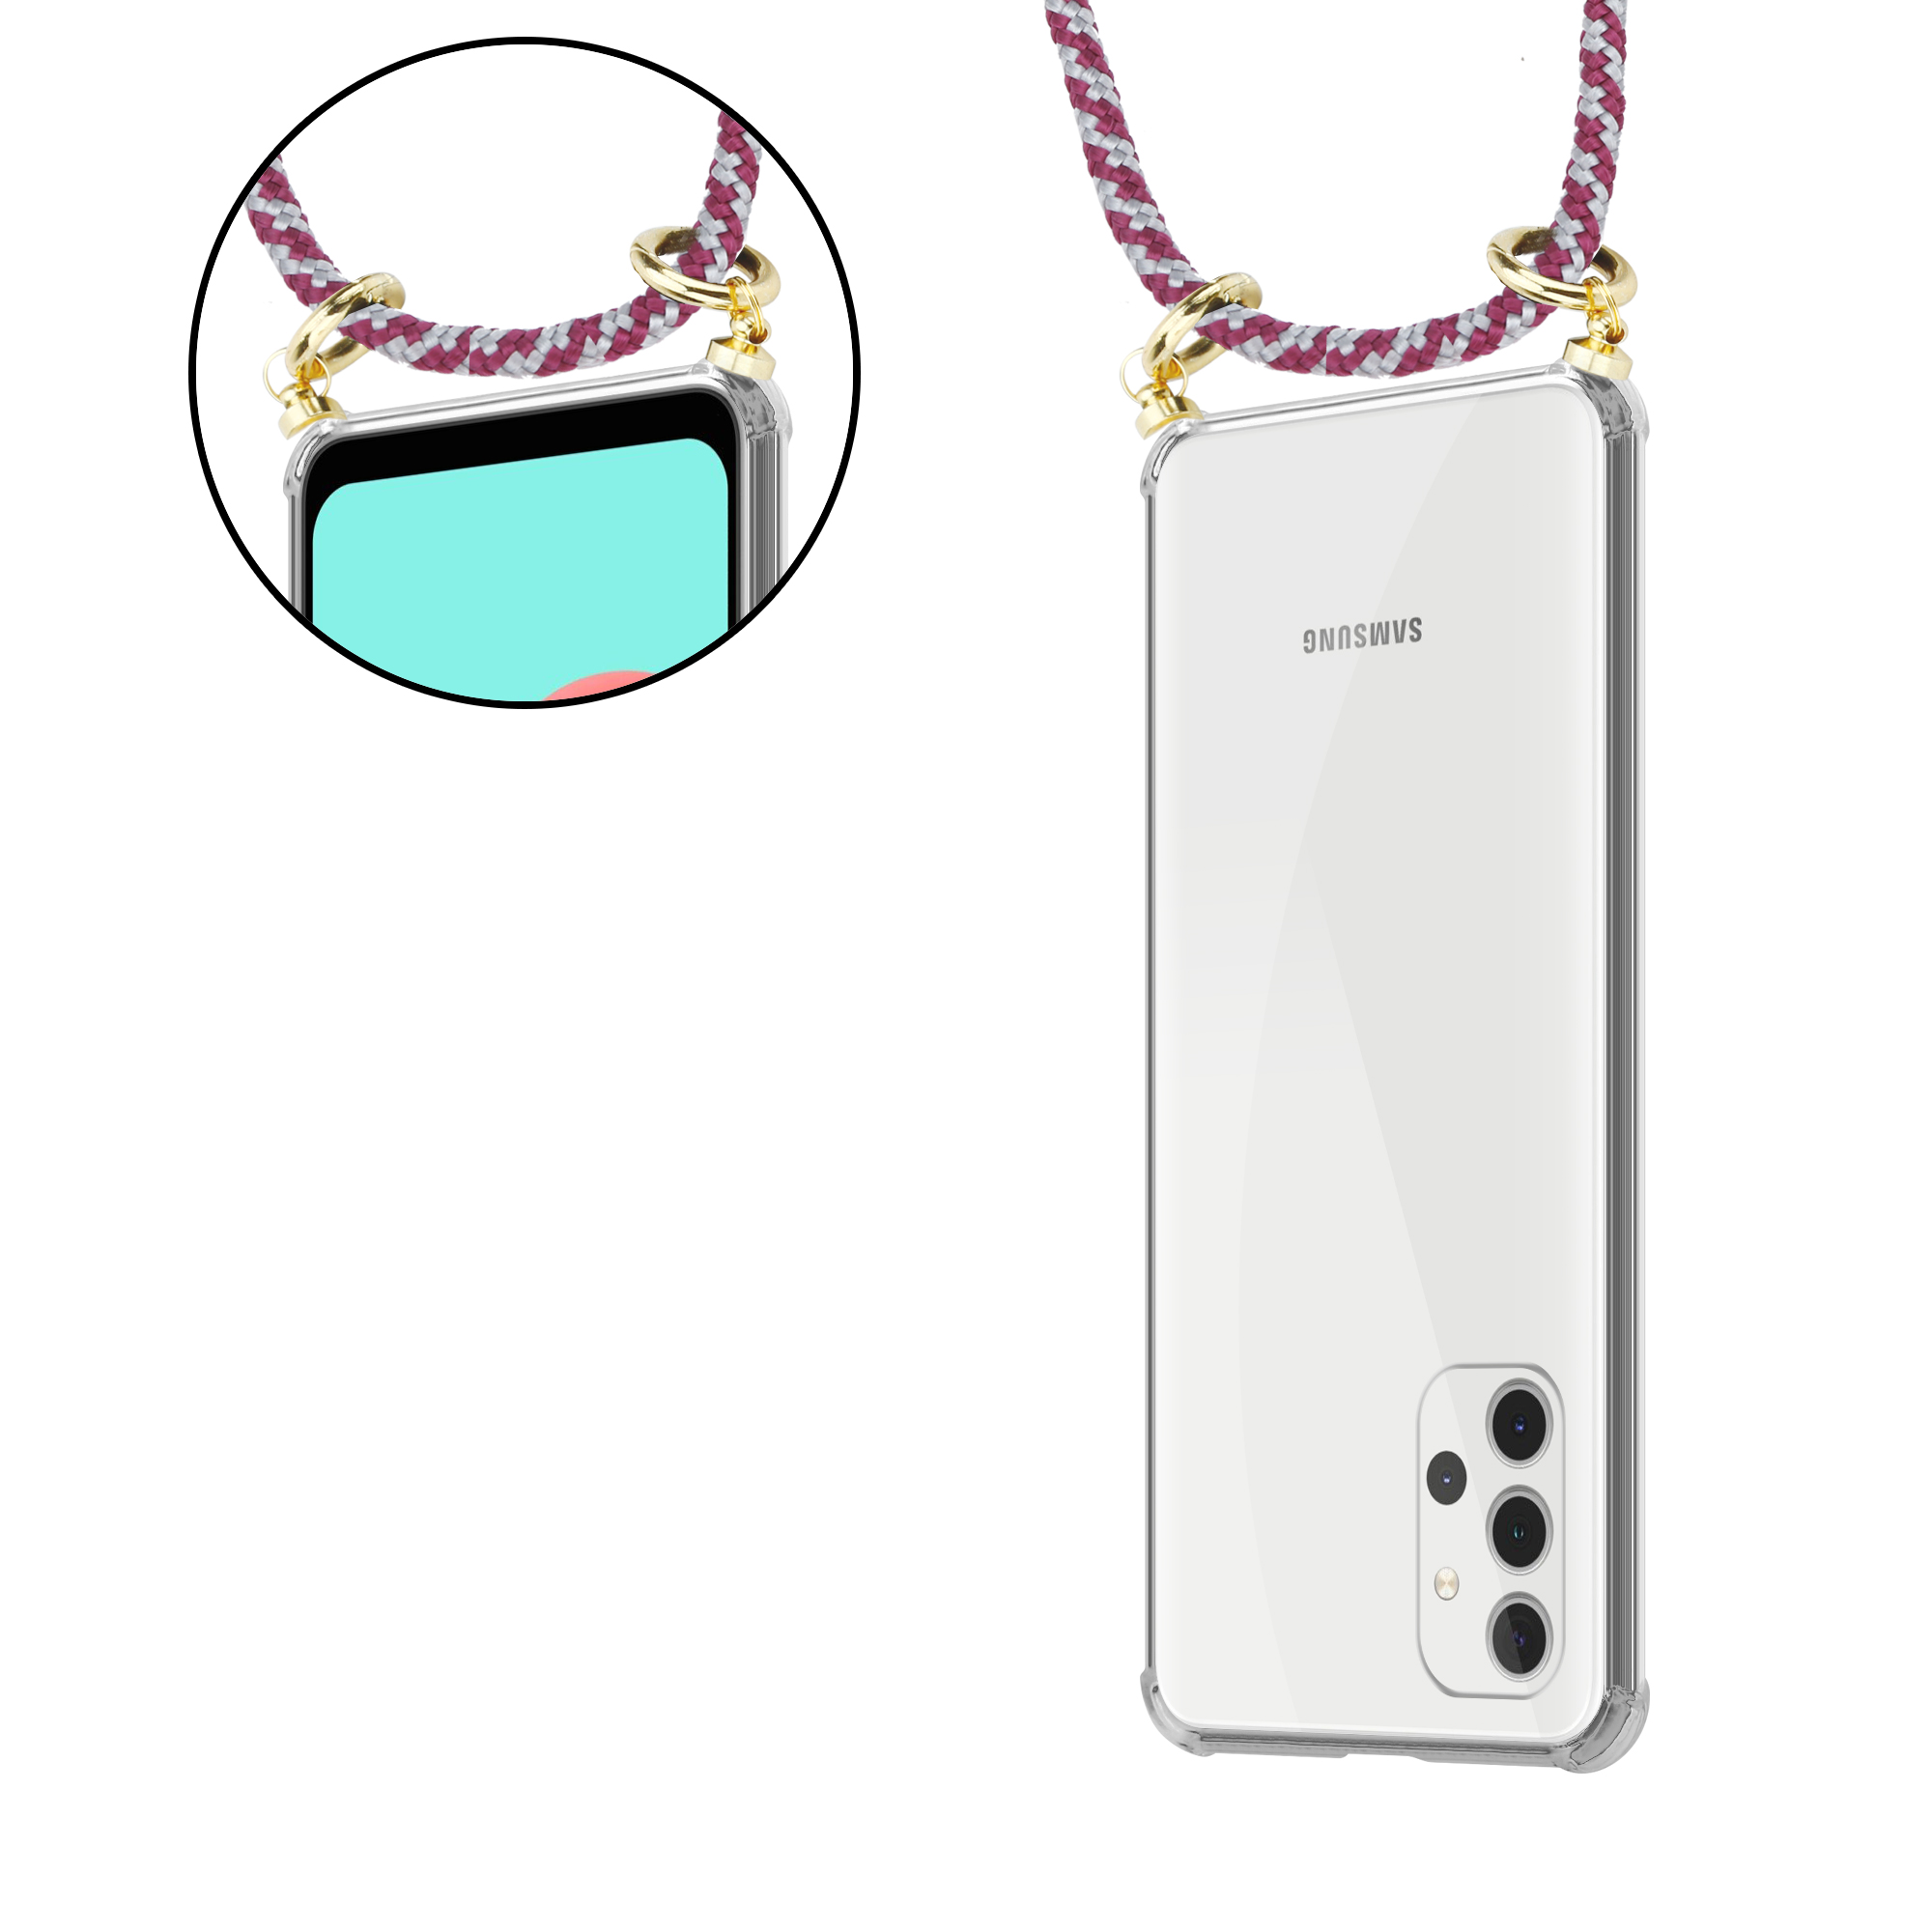 CADORABO Handy Kette mit A32 Backcover, Gold und Galaxy Ringen, ROT Hülle, Samsung, abnehmbarer WEIß Band Kordel 4G